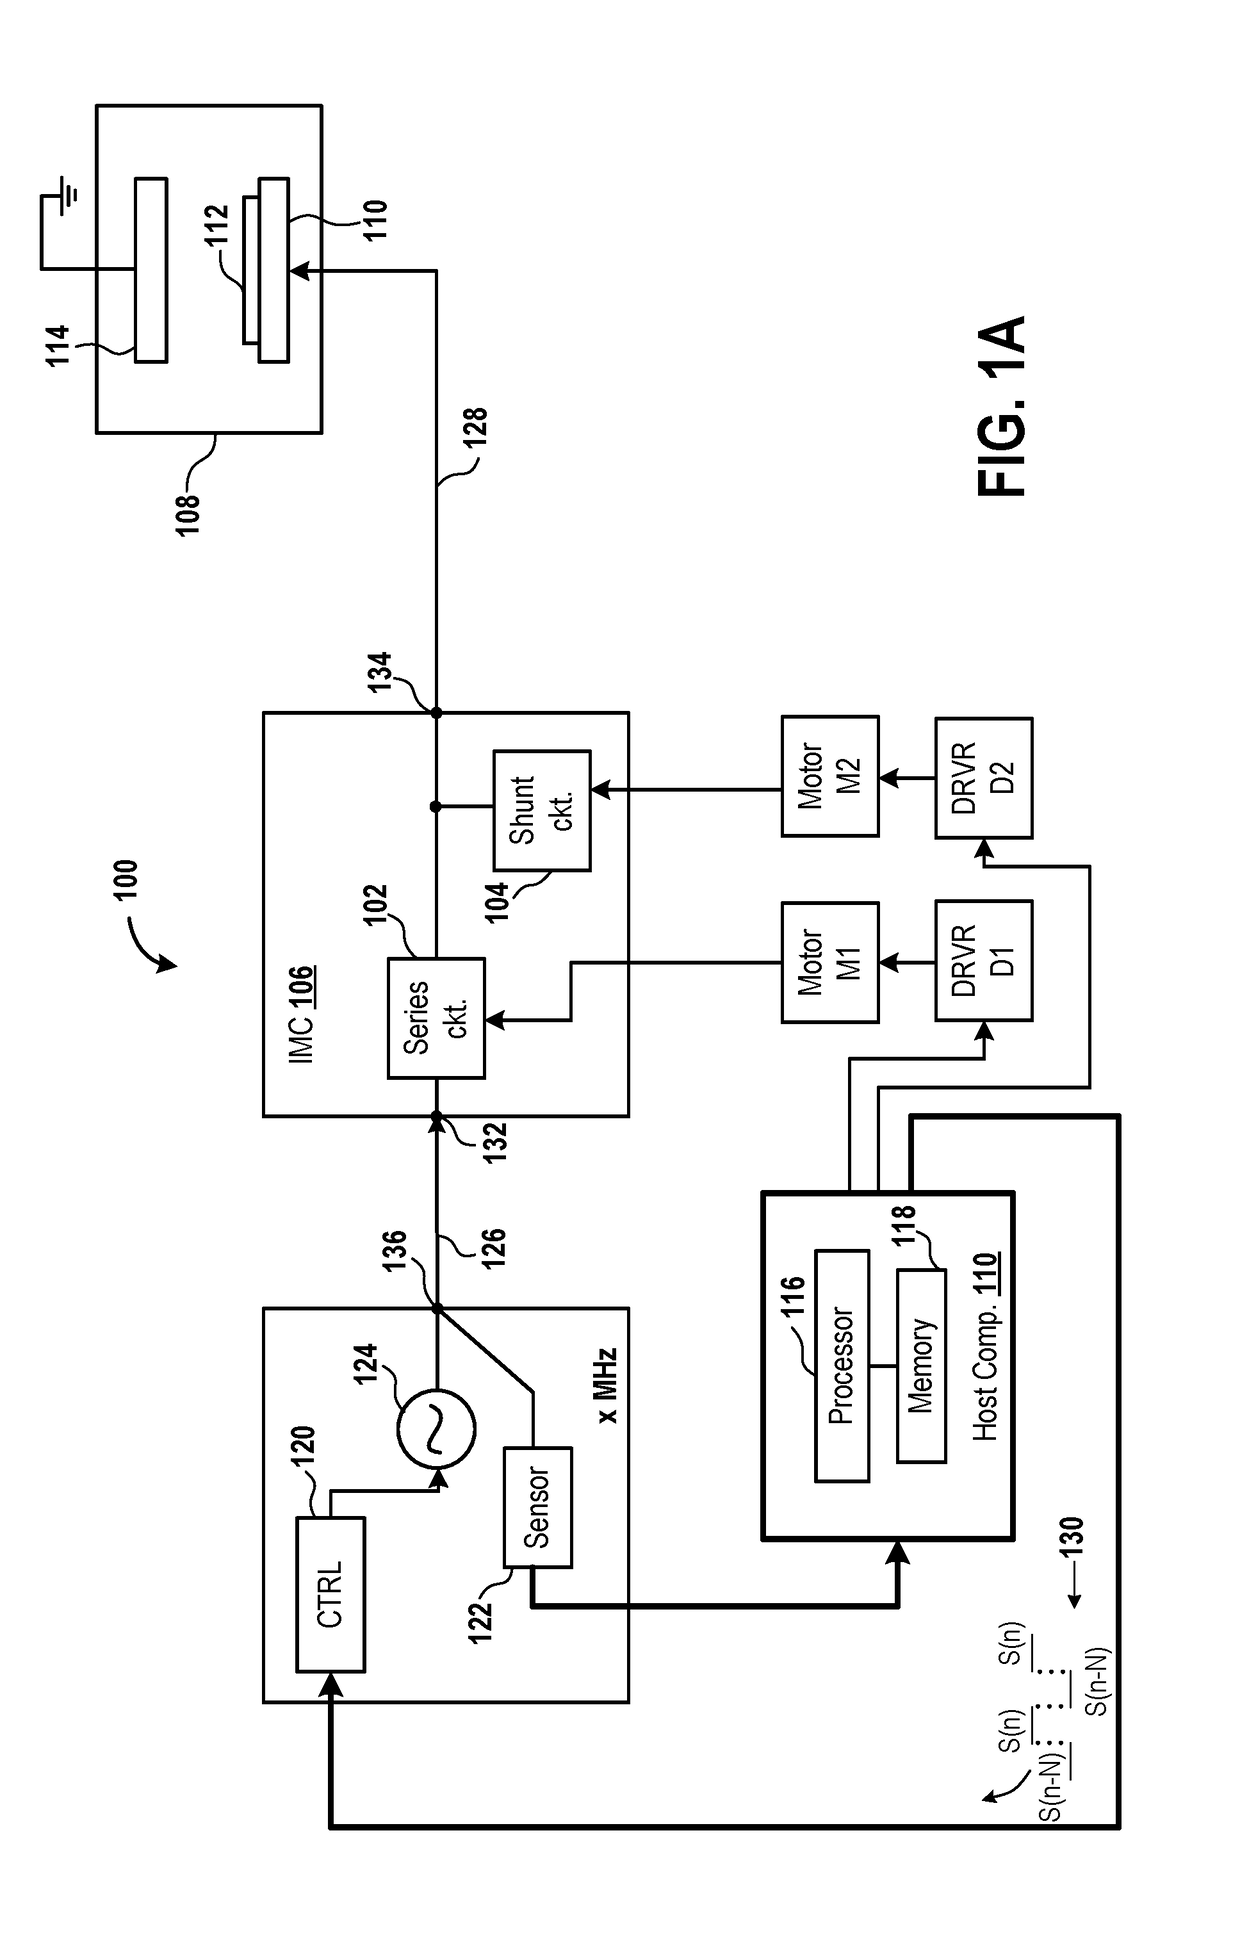 Systems and methods for tuning to reduce reflected power in multiple states